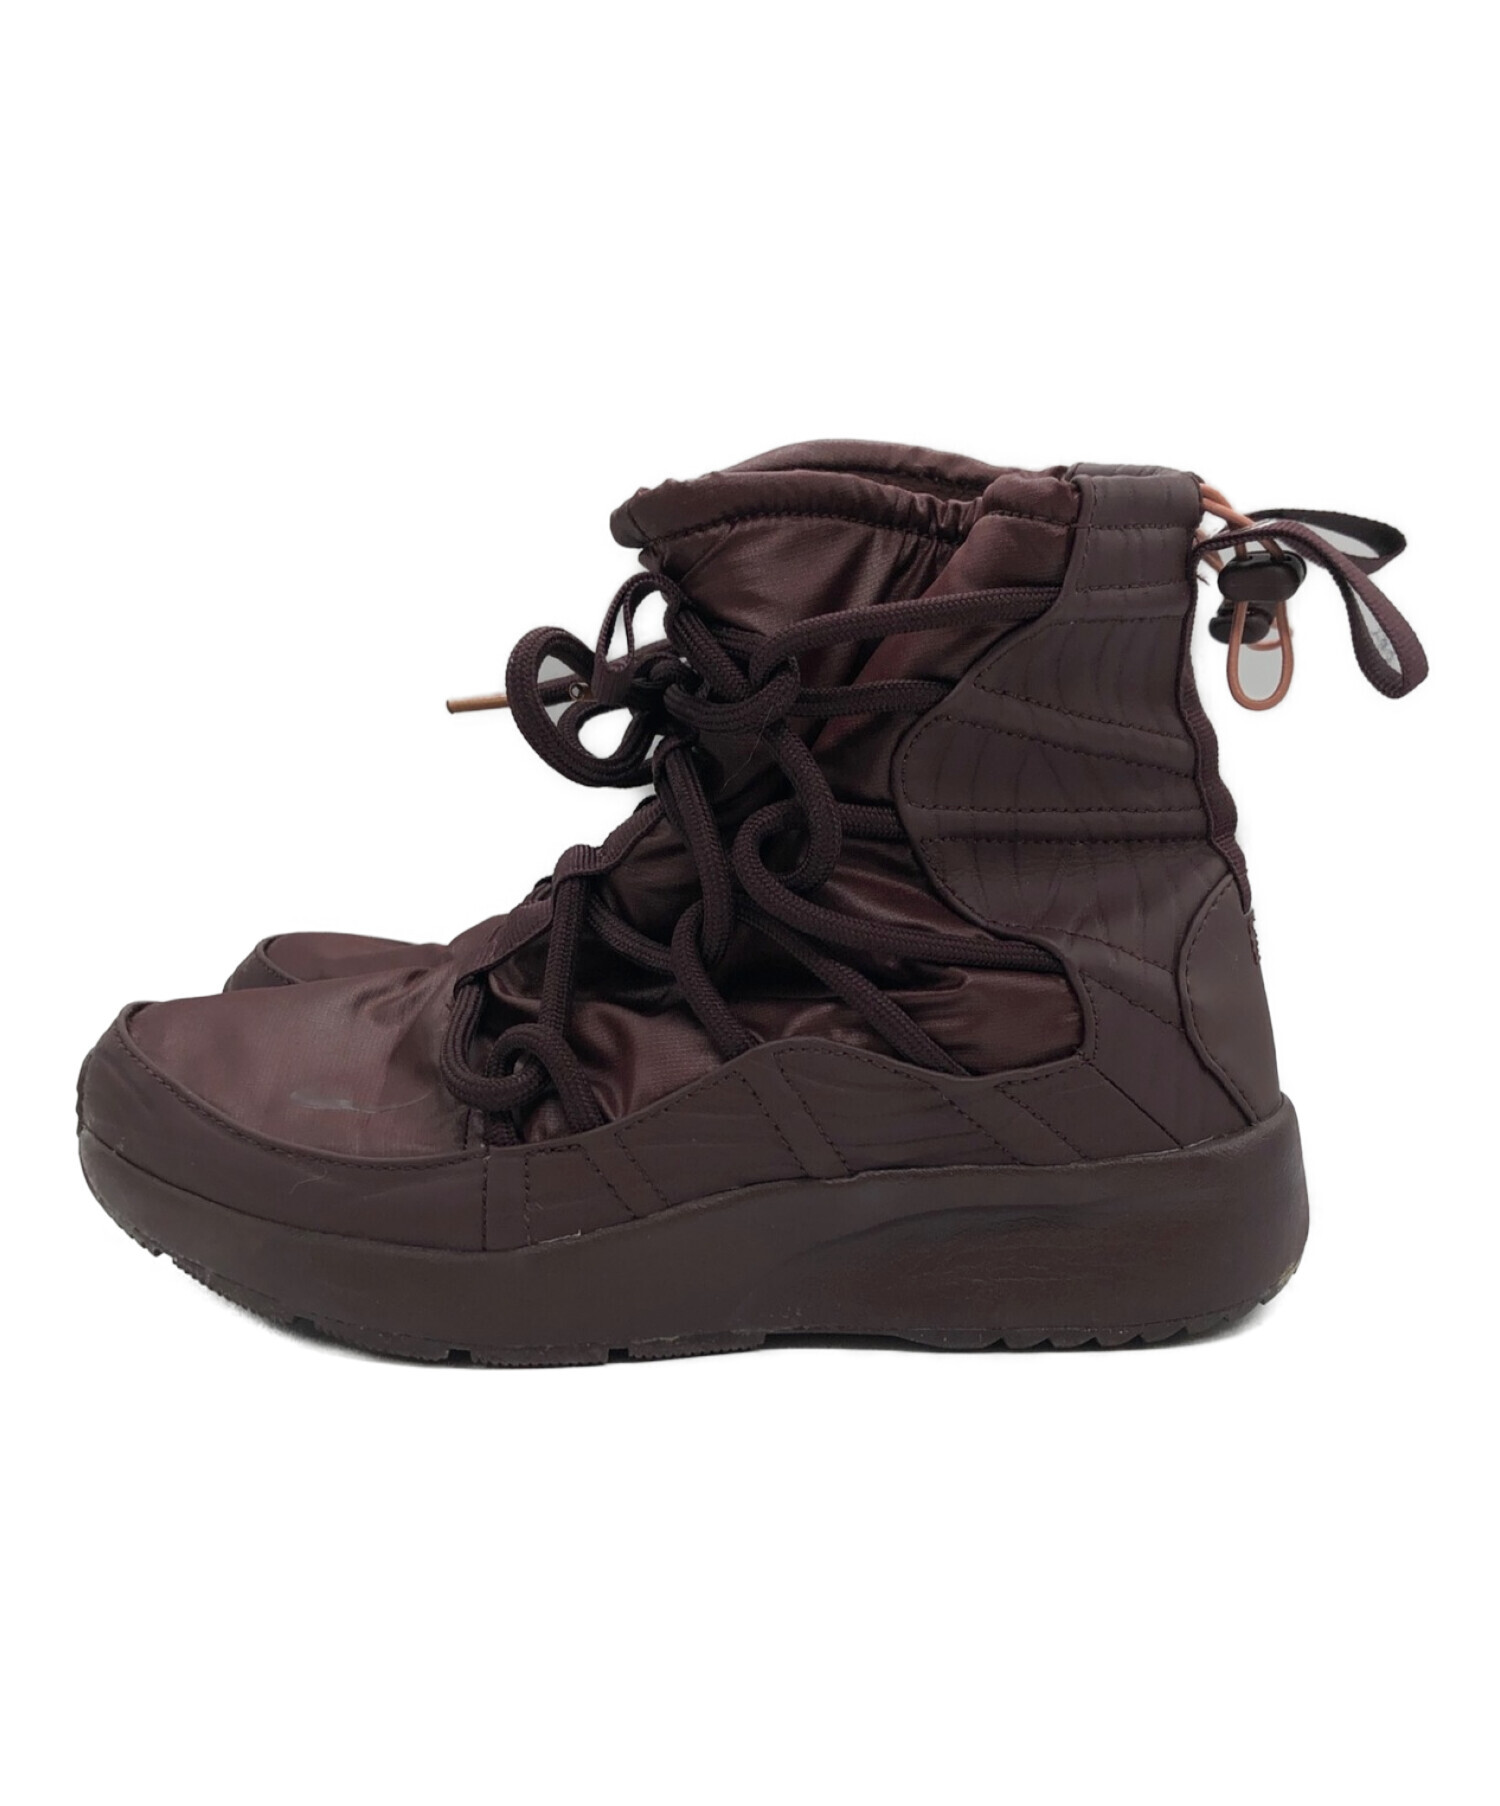 NIKE BOOTS SNEAKERS  24cm